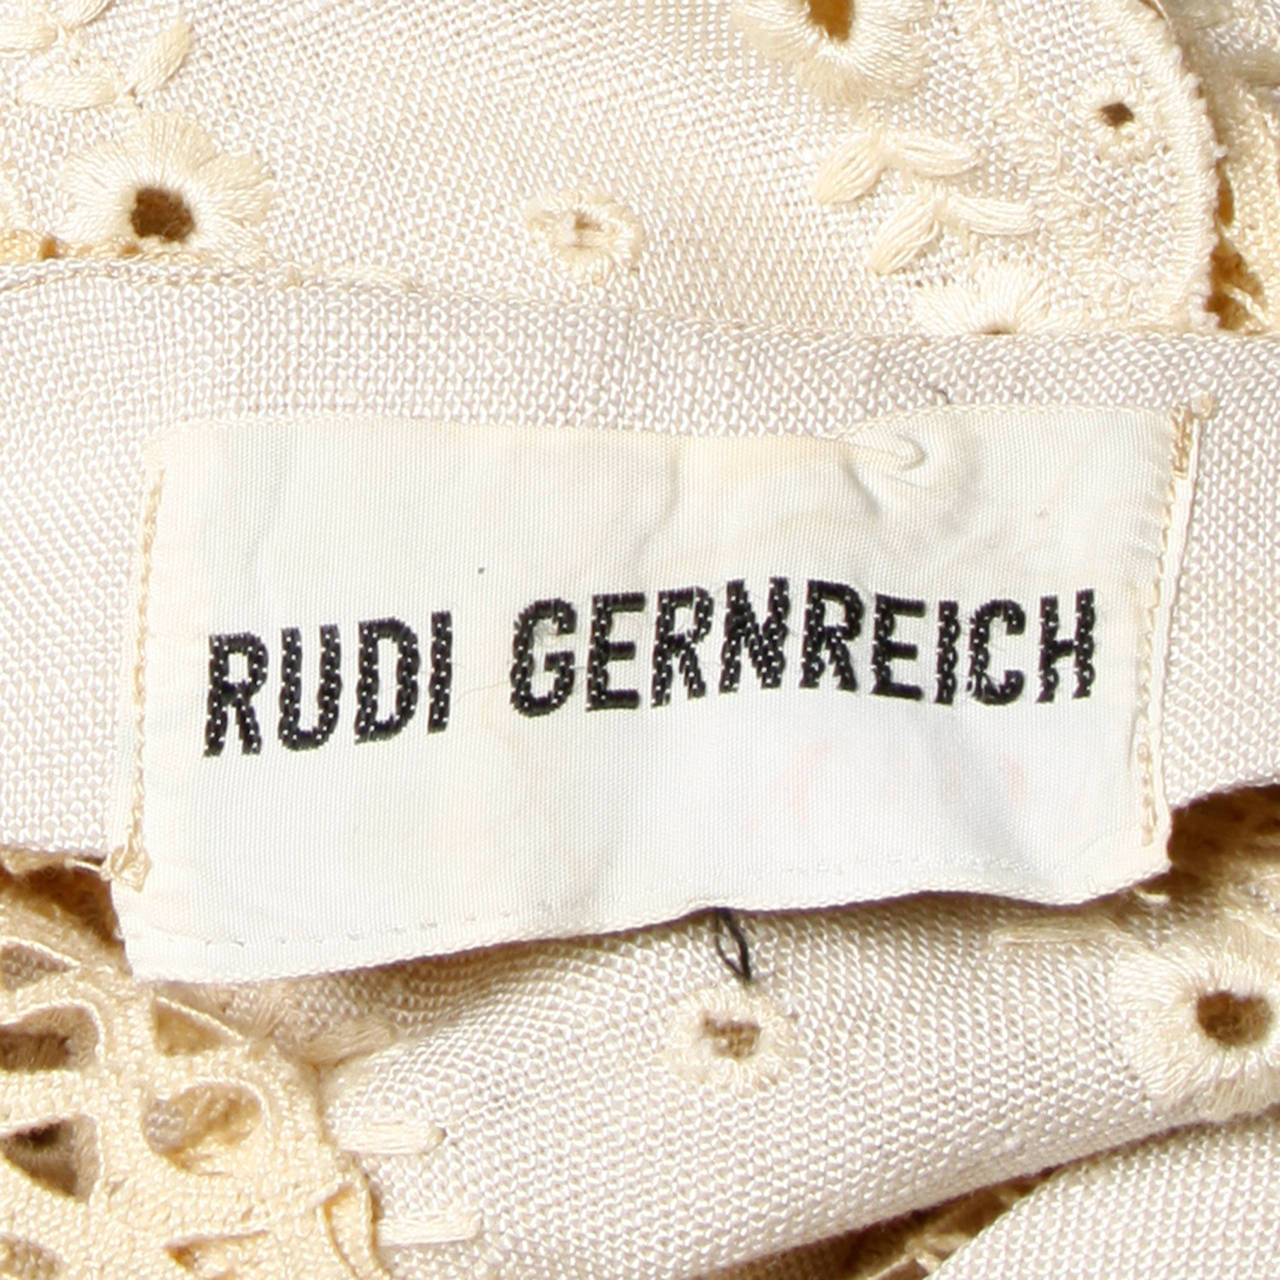 Rare vintage 1960s Rudi Gernreich scalloped lace and linen button up dress. 

Details:

Unlined
Front Button Closure
Marked Size: Not Marked
Estimated Size: S-M
Color: Off White/ Beige Taupe
Fabric: Linen/ Lace
Label: Rudi